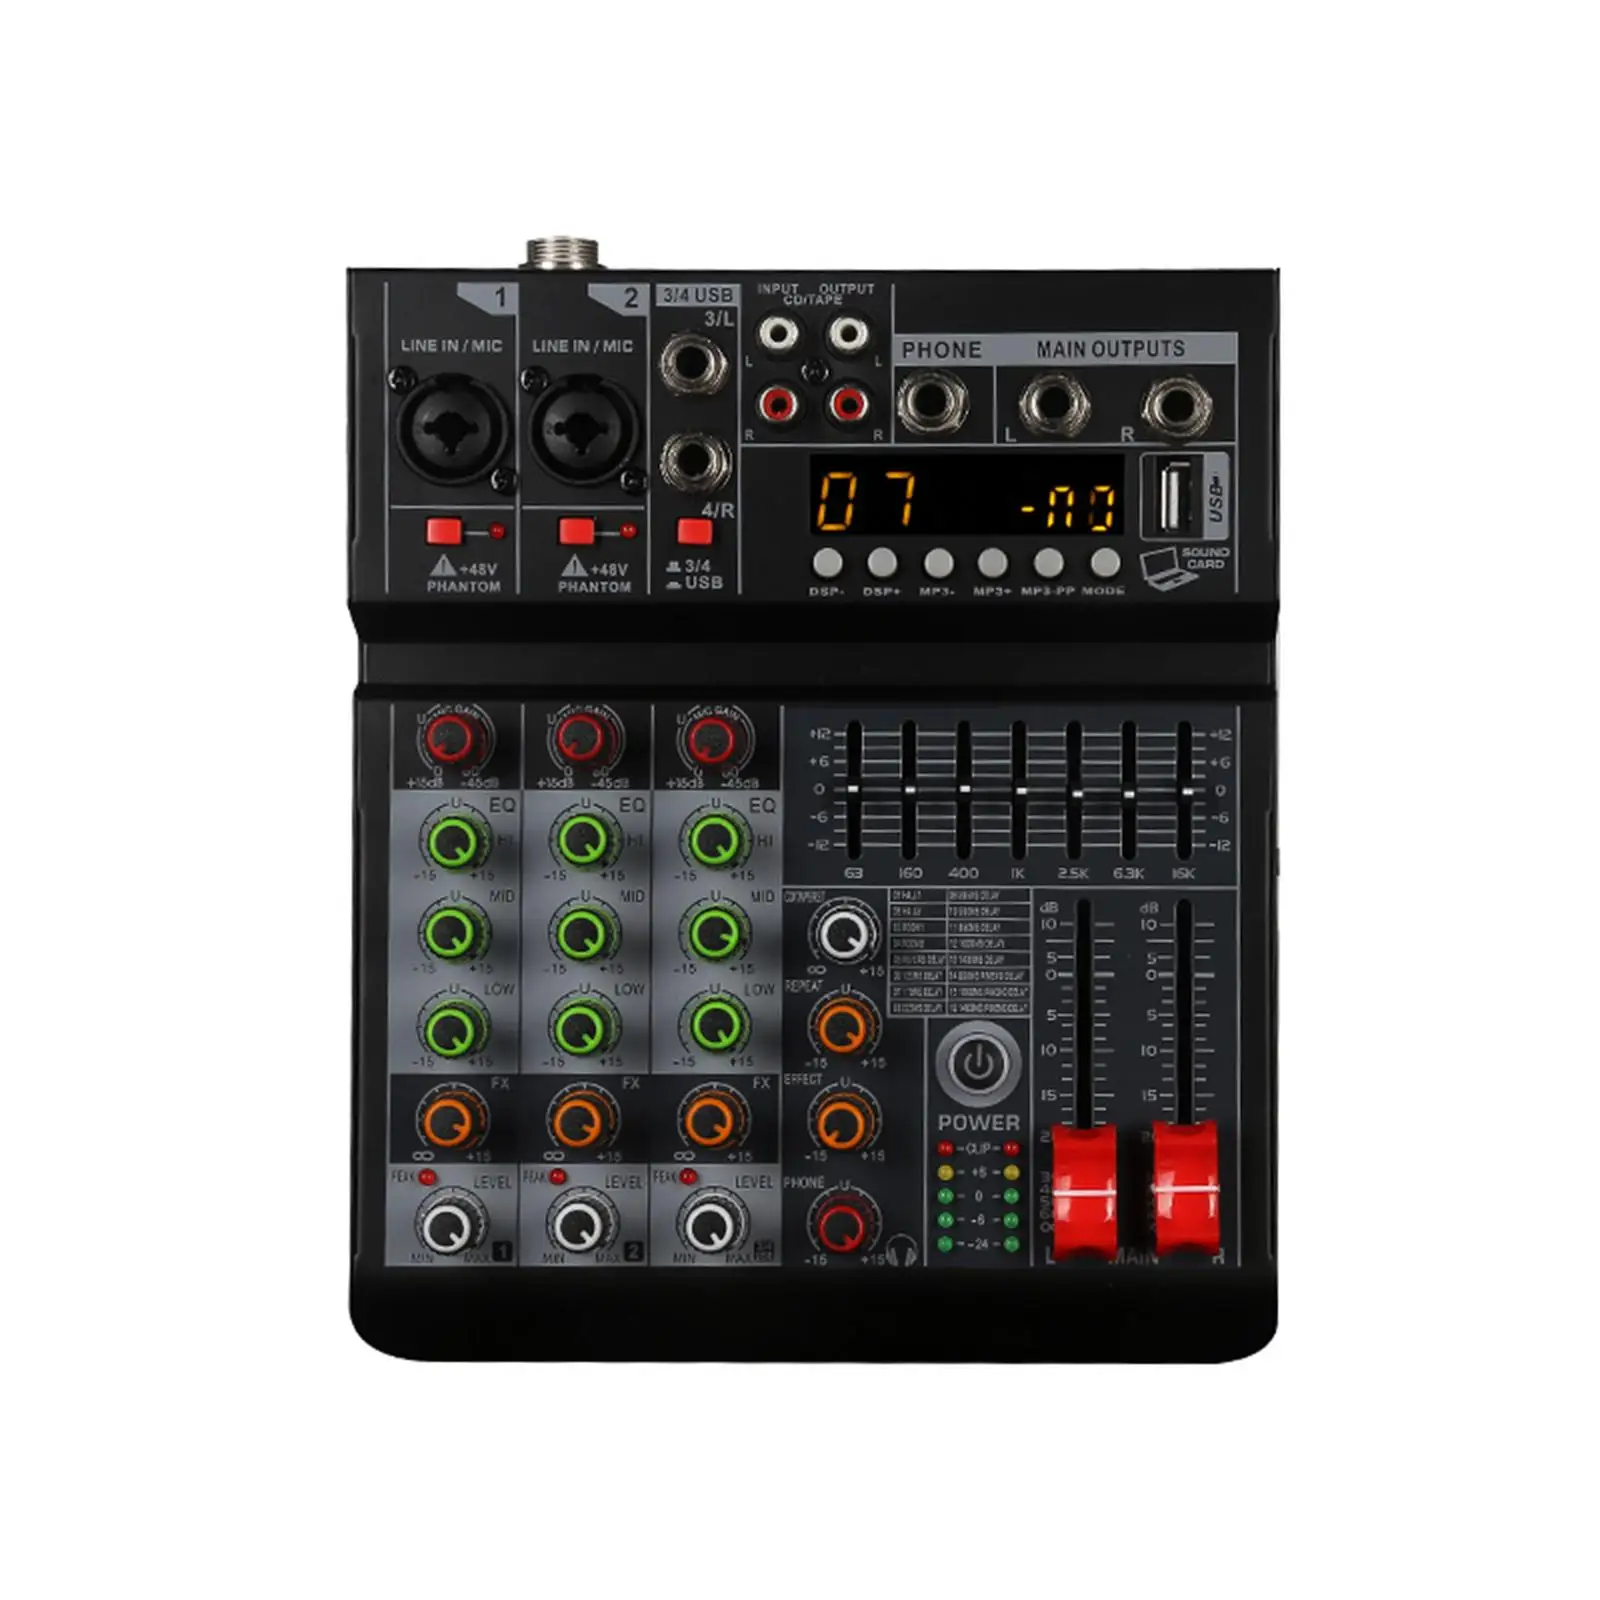 4 Channel Mixer Sound Mixing Console Digital Mixer AUX USB for Recording DJ 2 Channel Stereo Input Professional EU Adapter